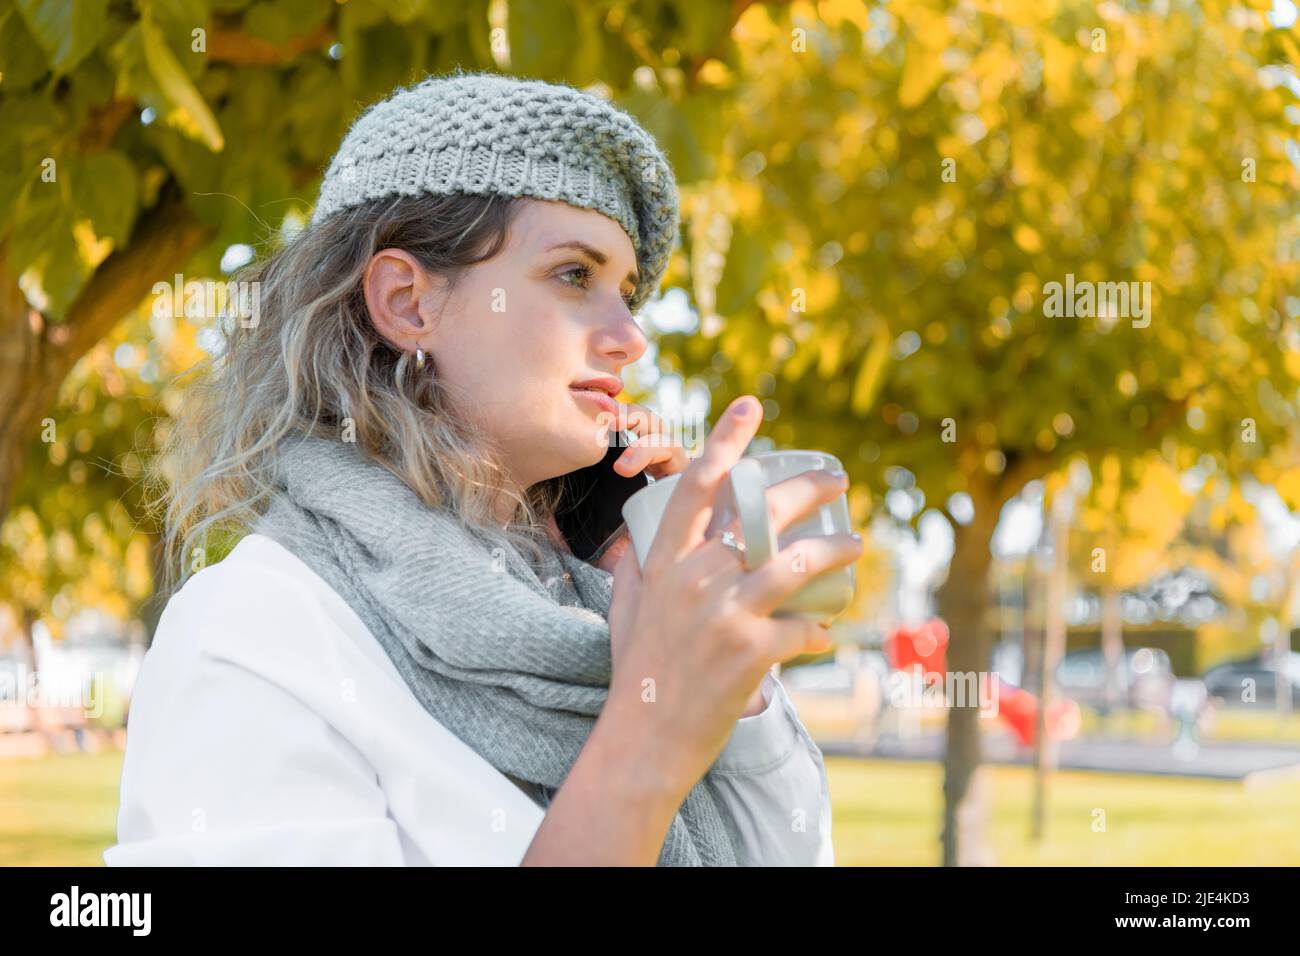 Young woman with a wool hat listening to her phone Stock Photo